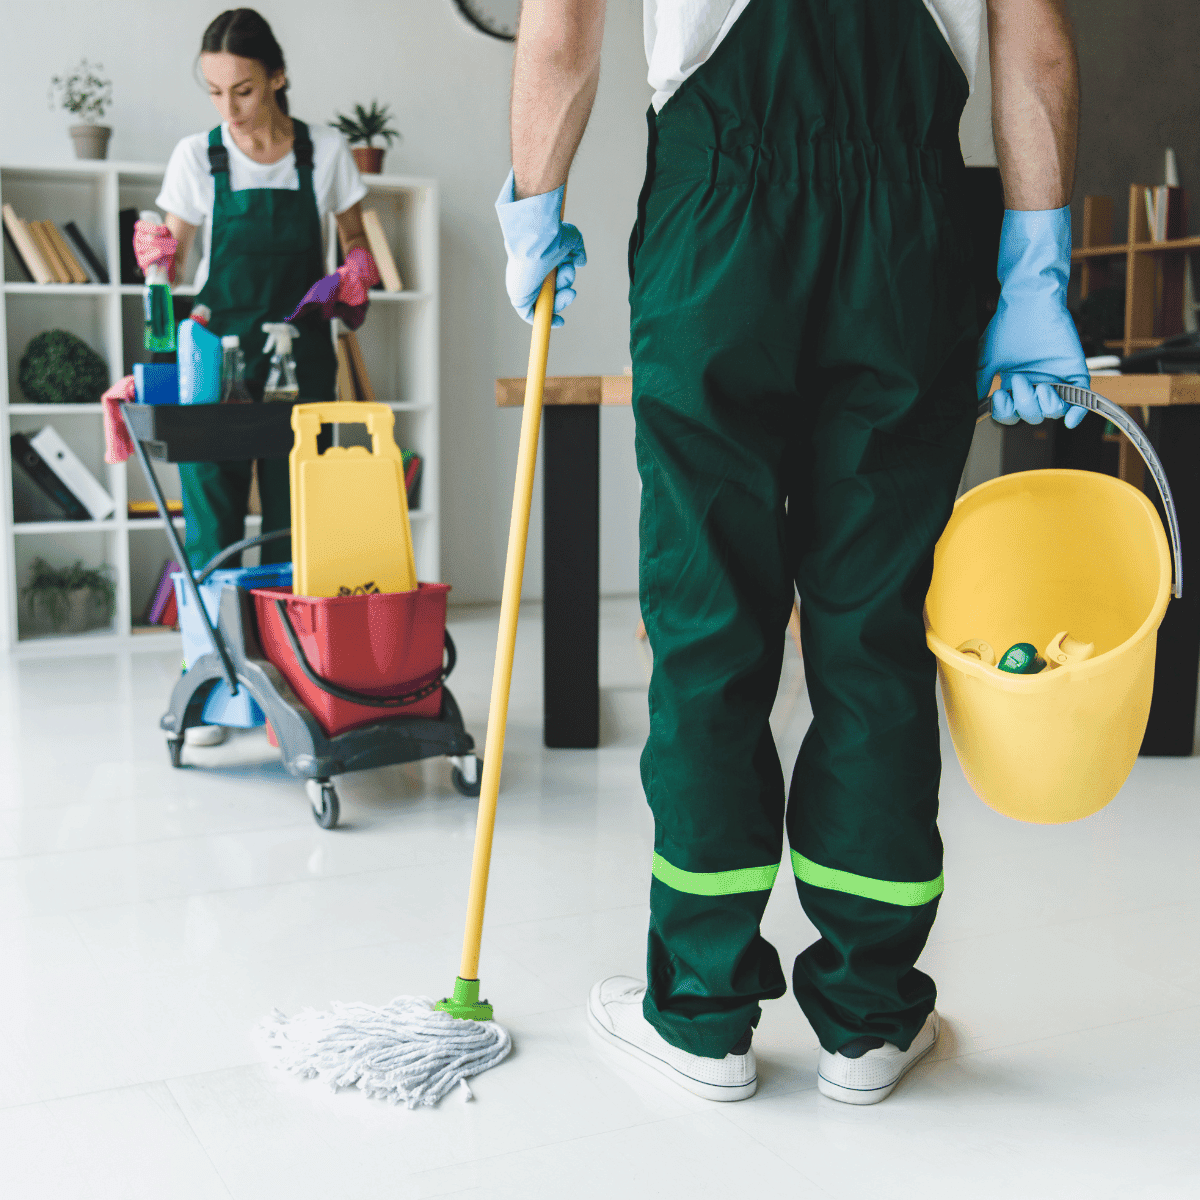 Read more about the article How to clean the office facilities with employees present?